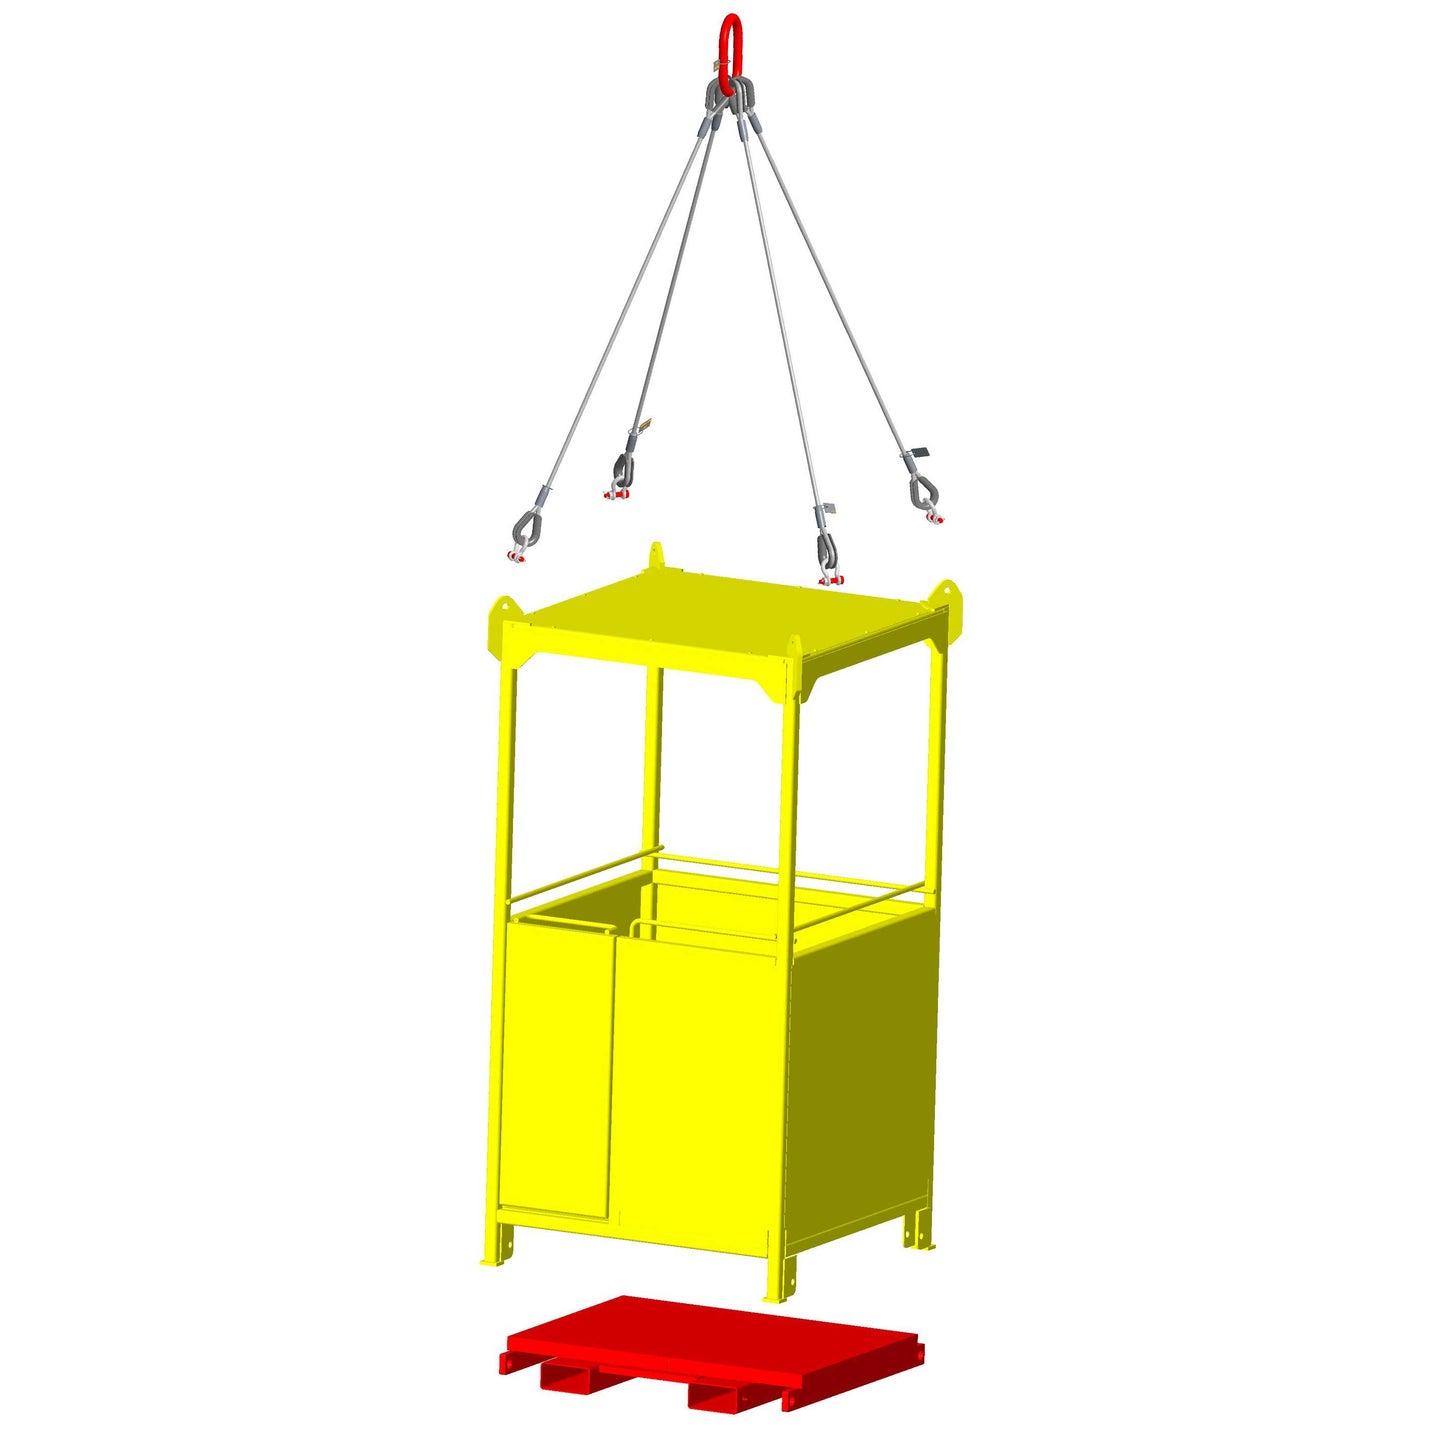 M&W 2000 lb. Personnel Lifting Basket with Test Weight & Suspension Bridle